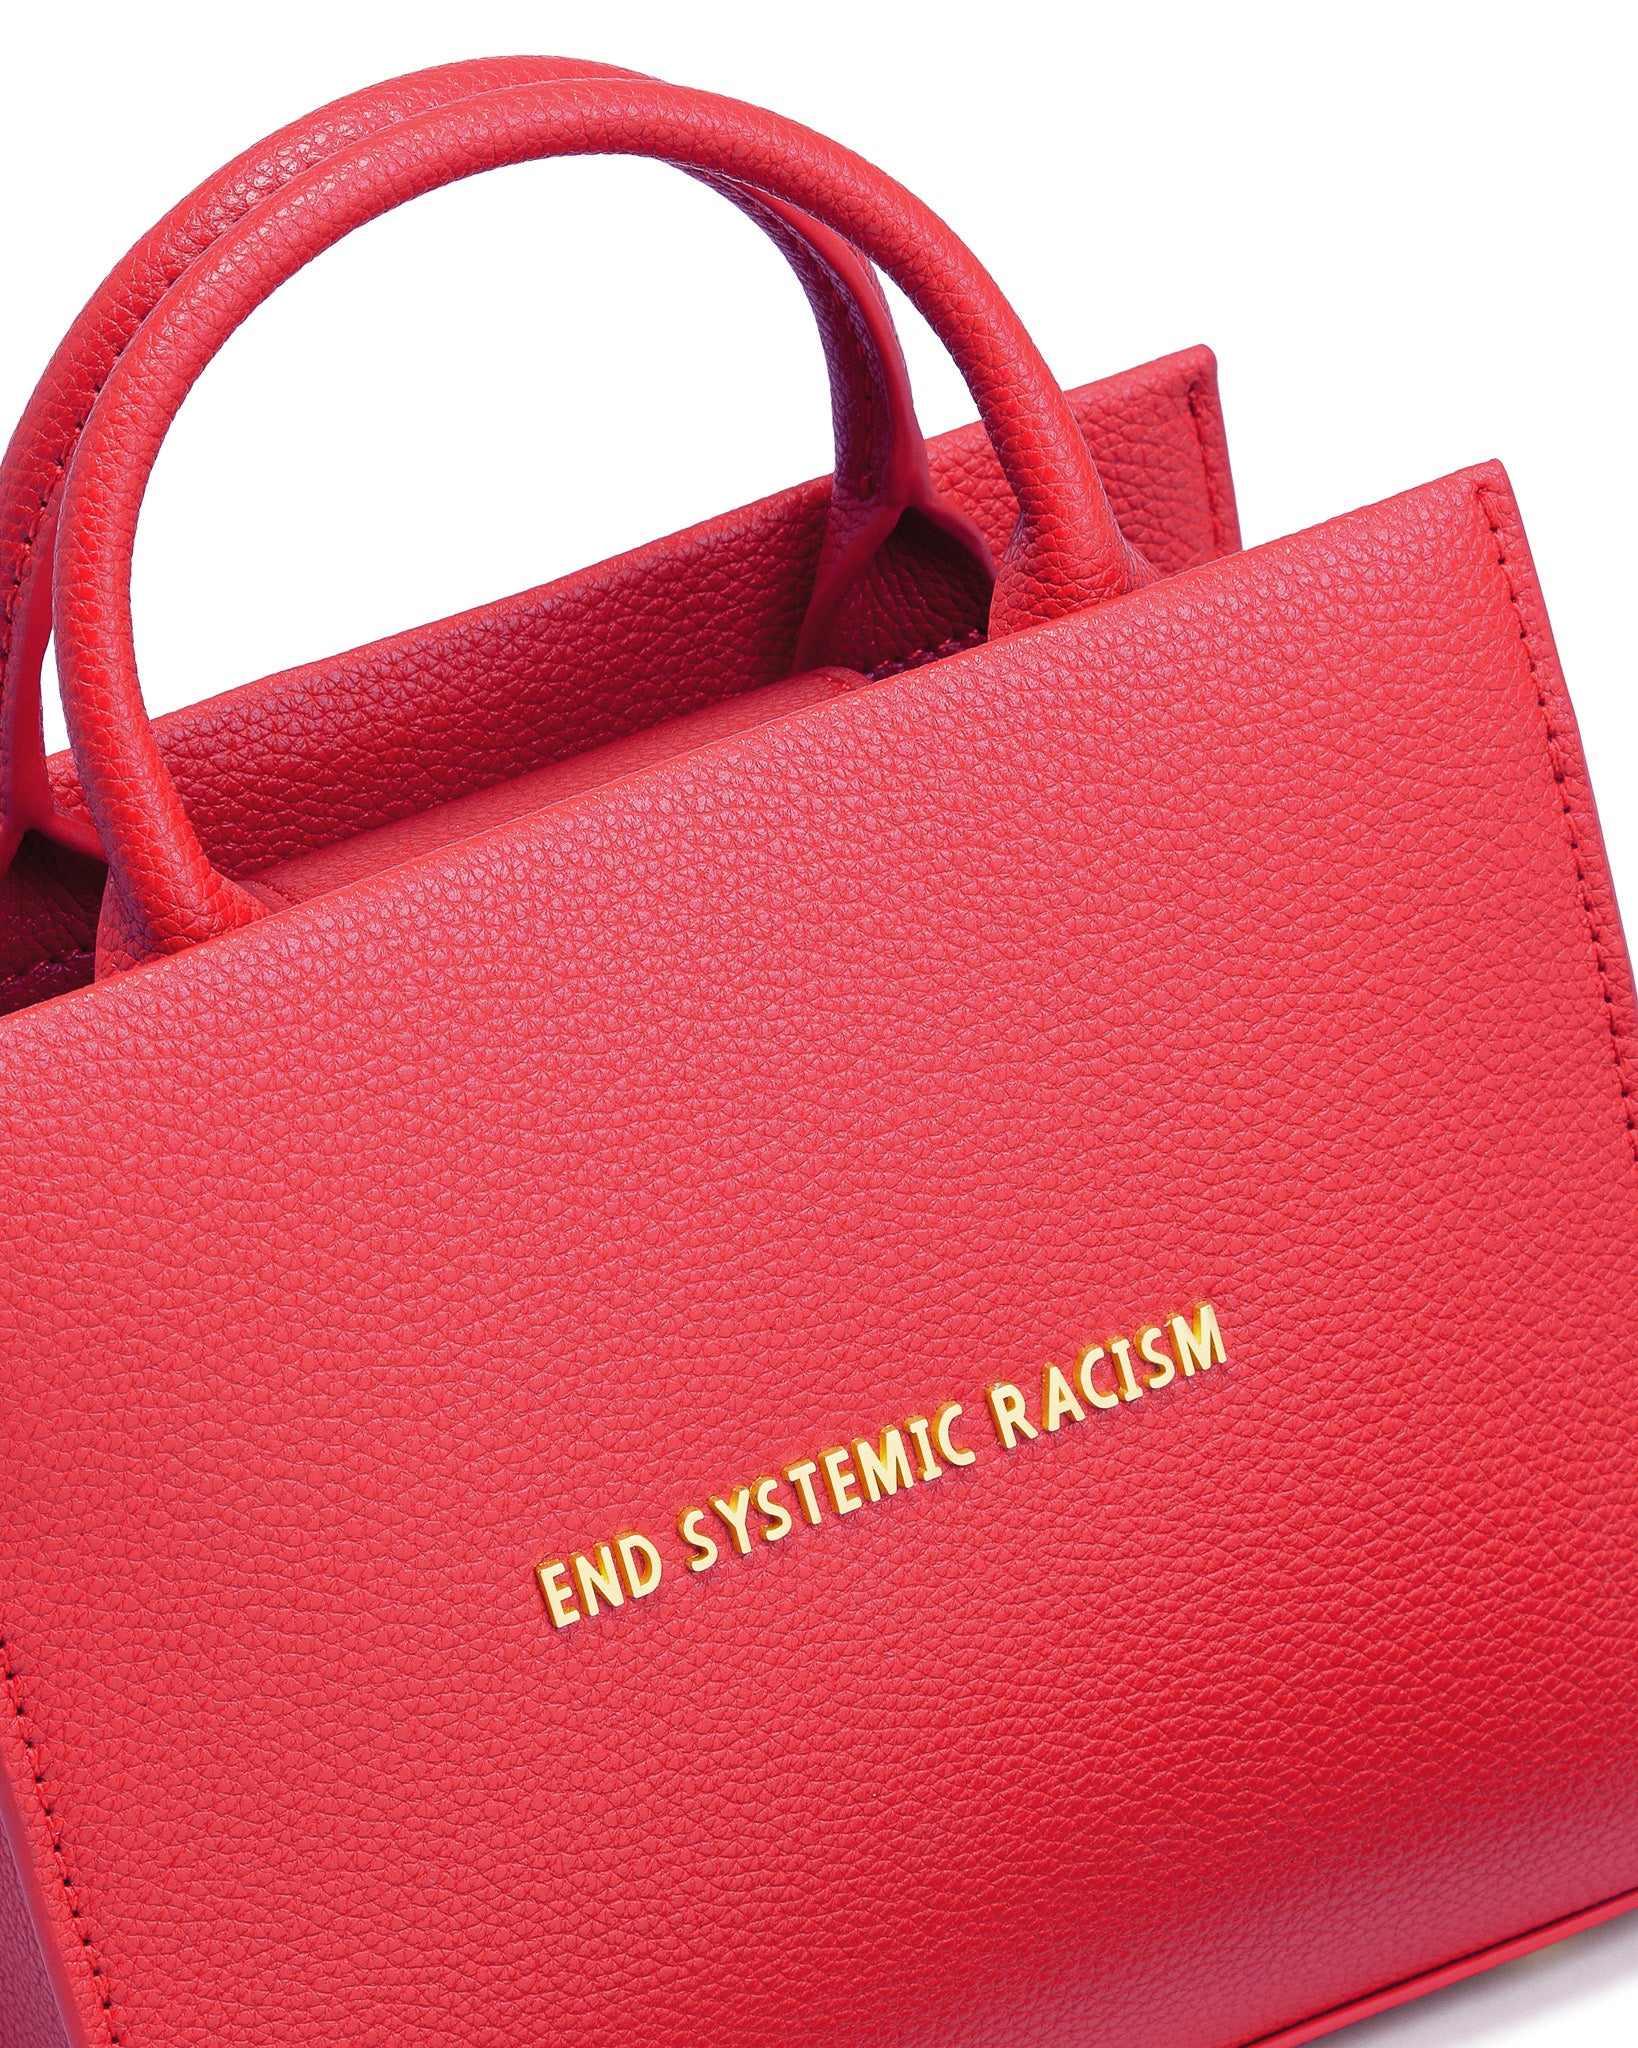 Brandon Blackwood New York - ESR Tote - Red Recycled Leather